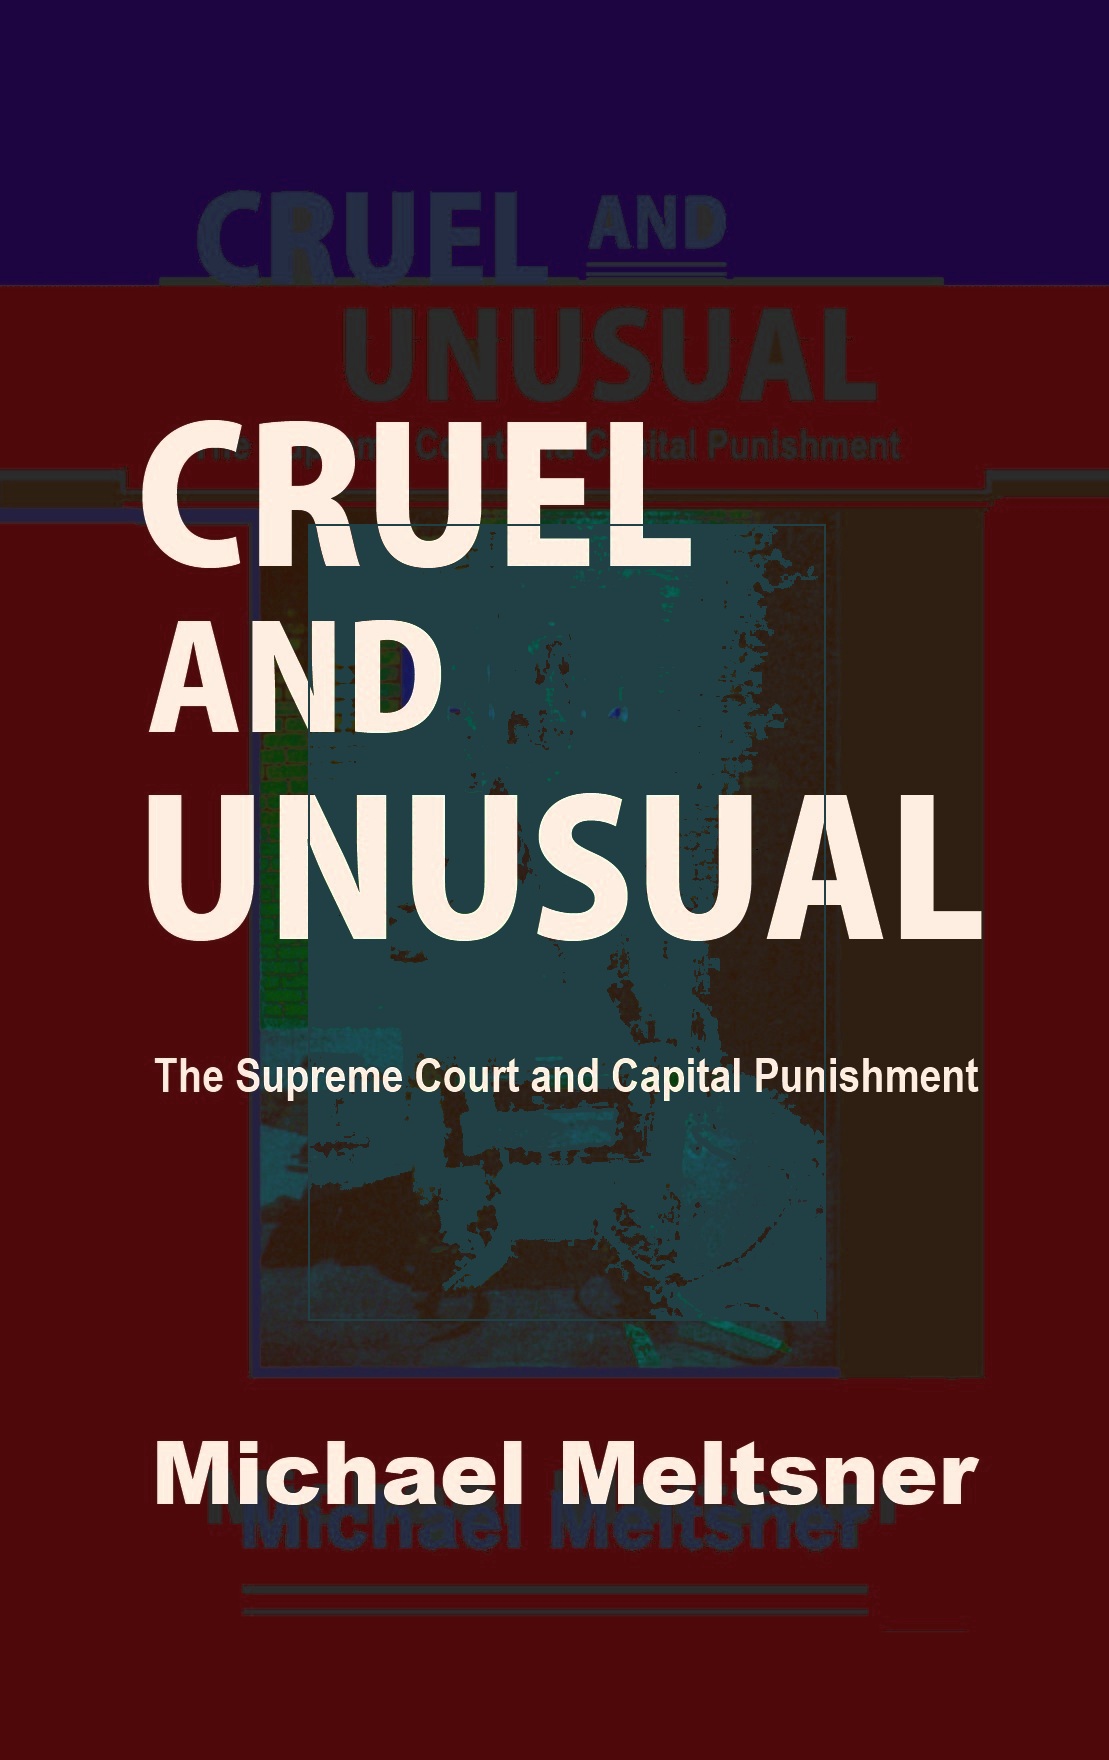 is the death penalty cruel and unusual